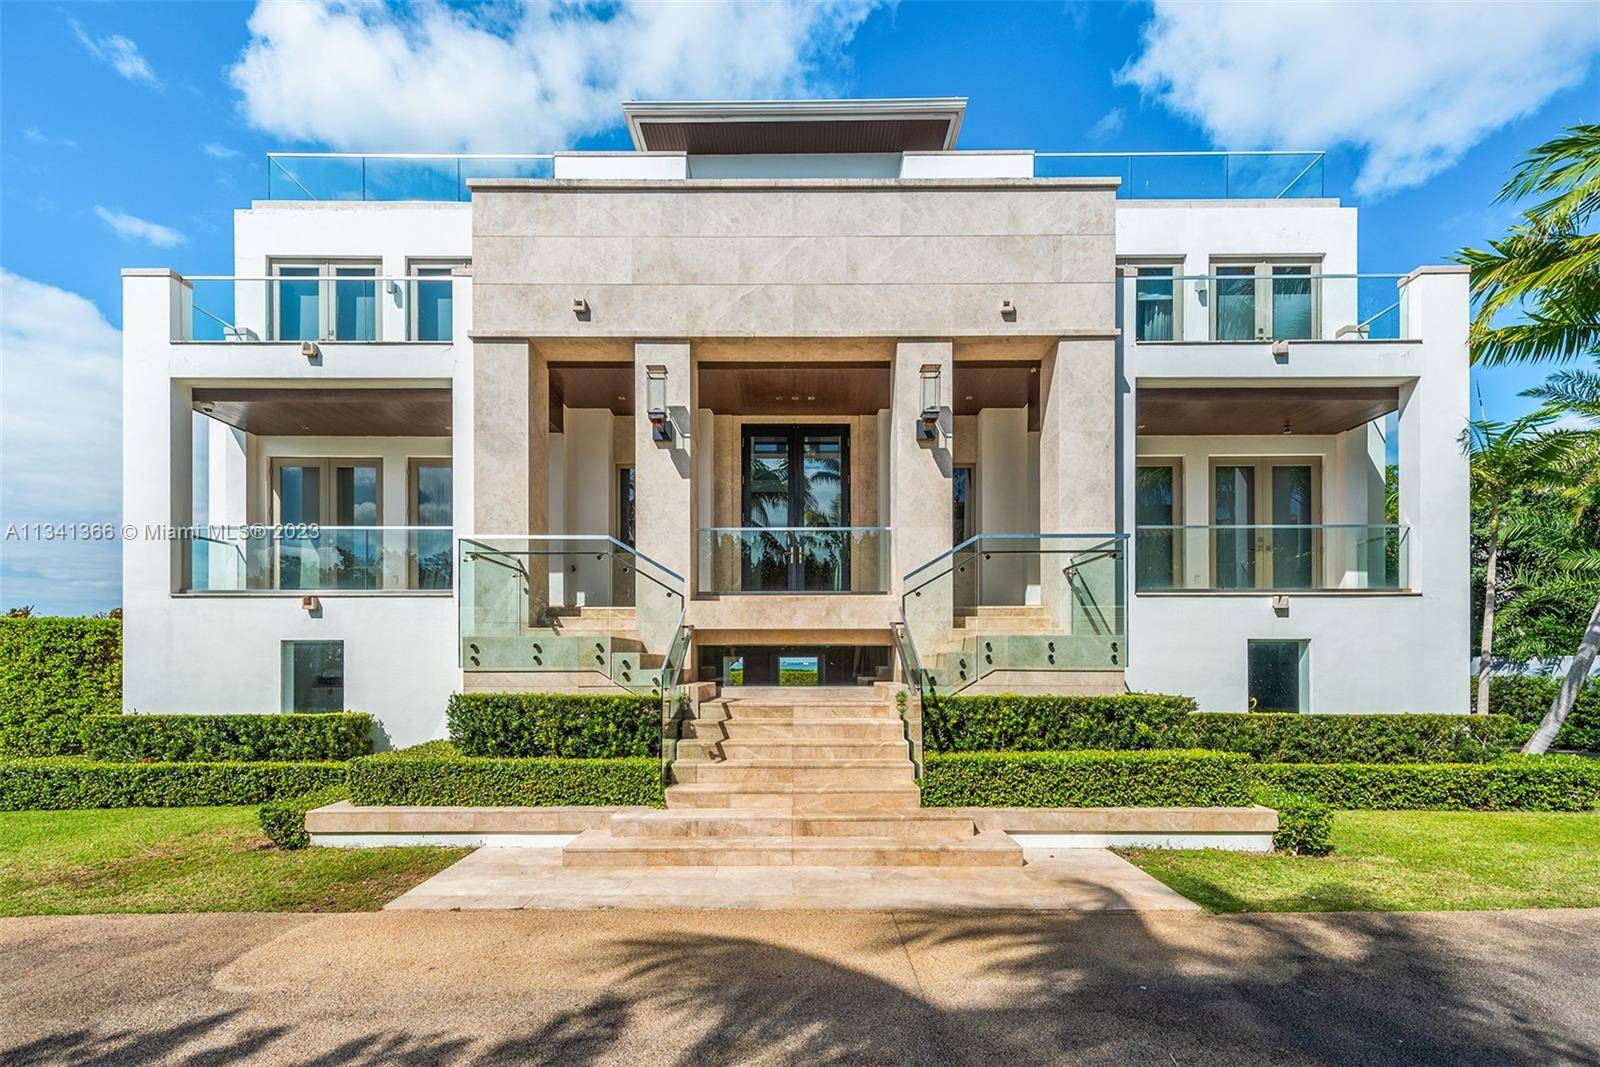 755 S. Mashta Dr. is one of South Florida's most private residences.